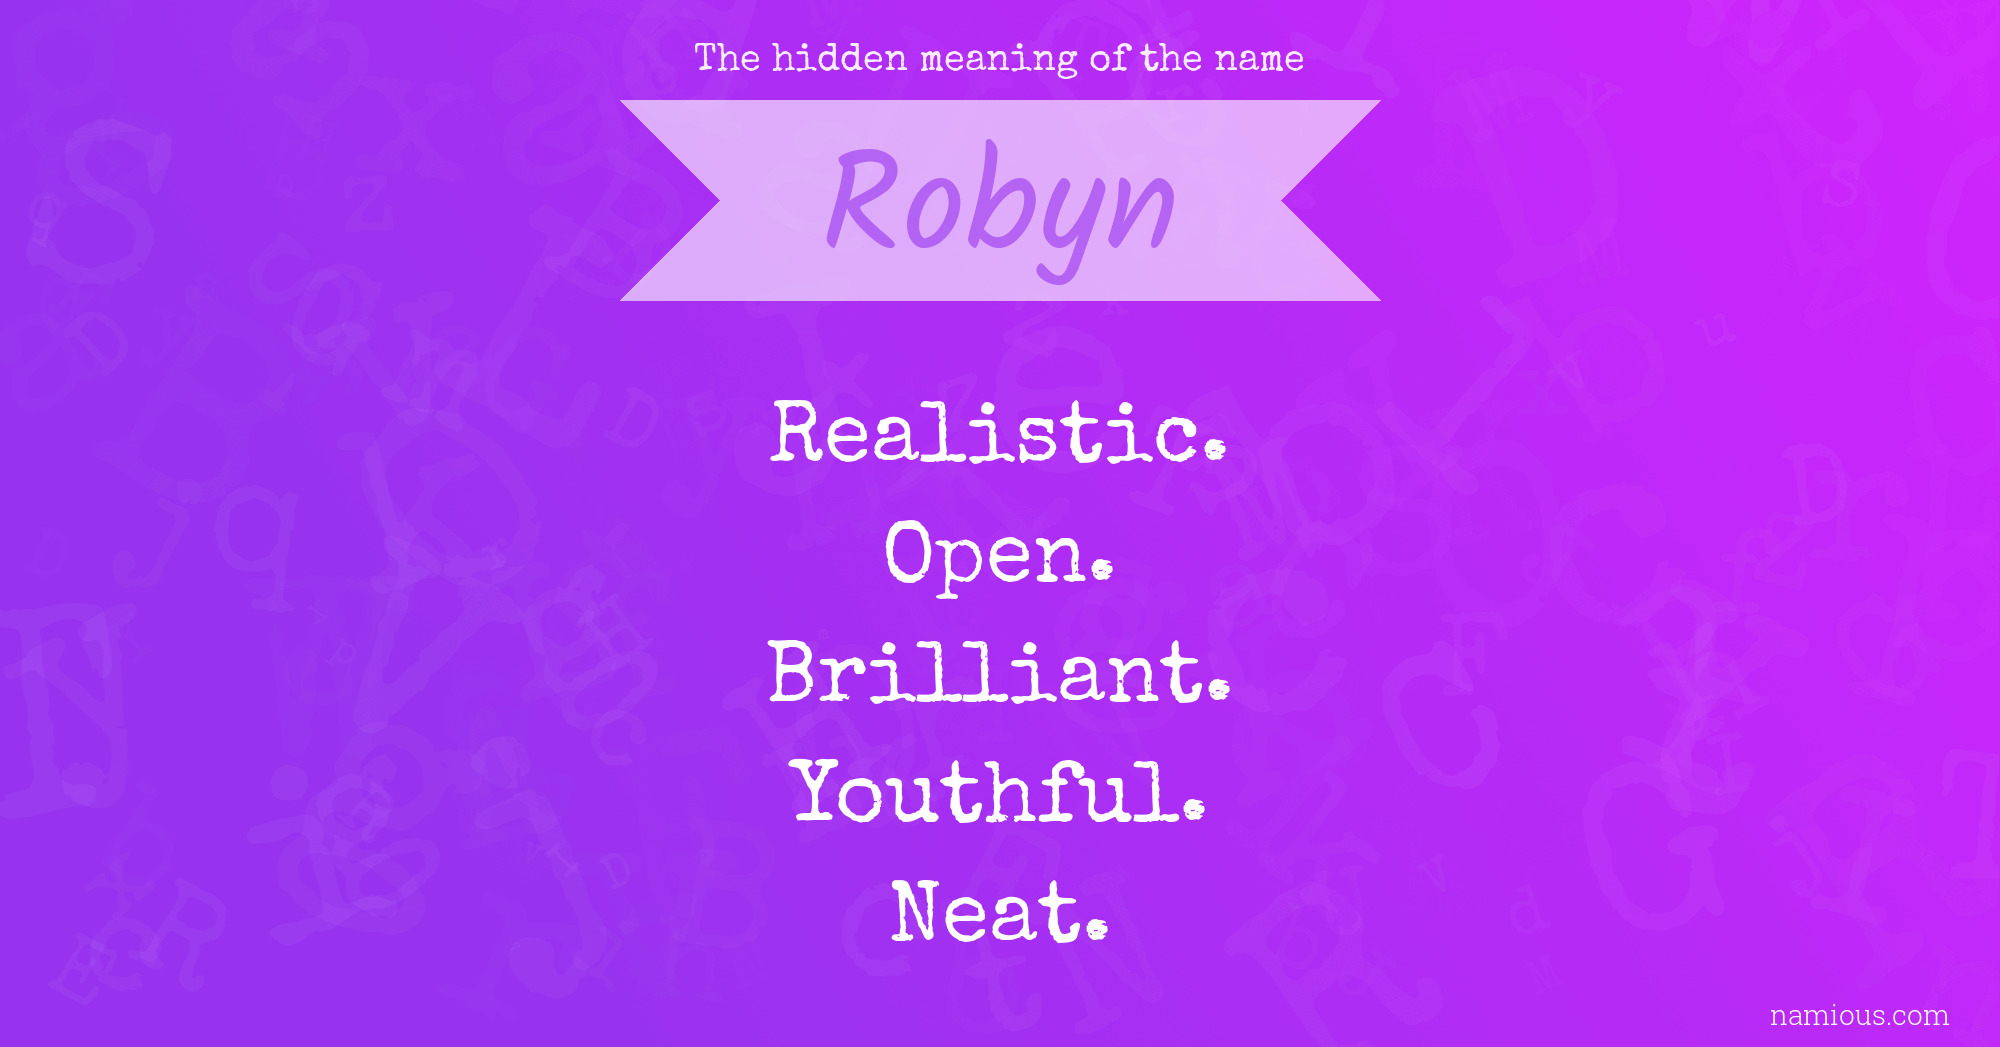 The hidden meaning of the name Robyn